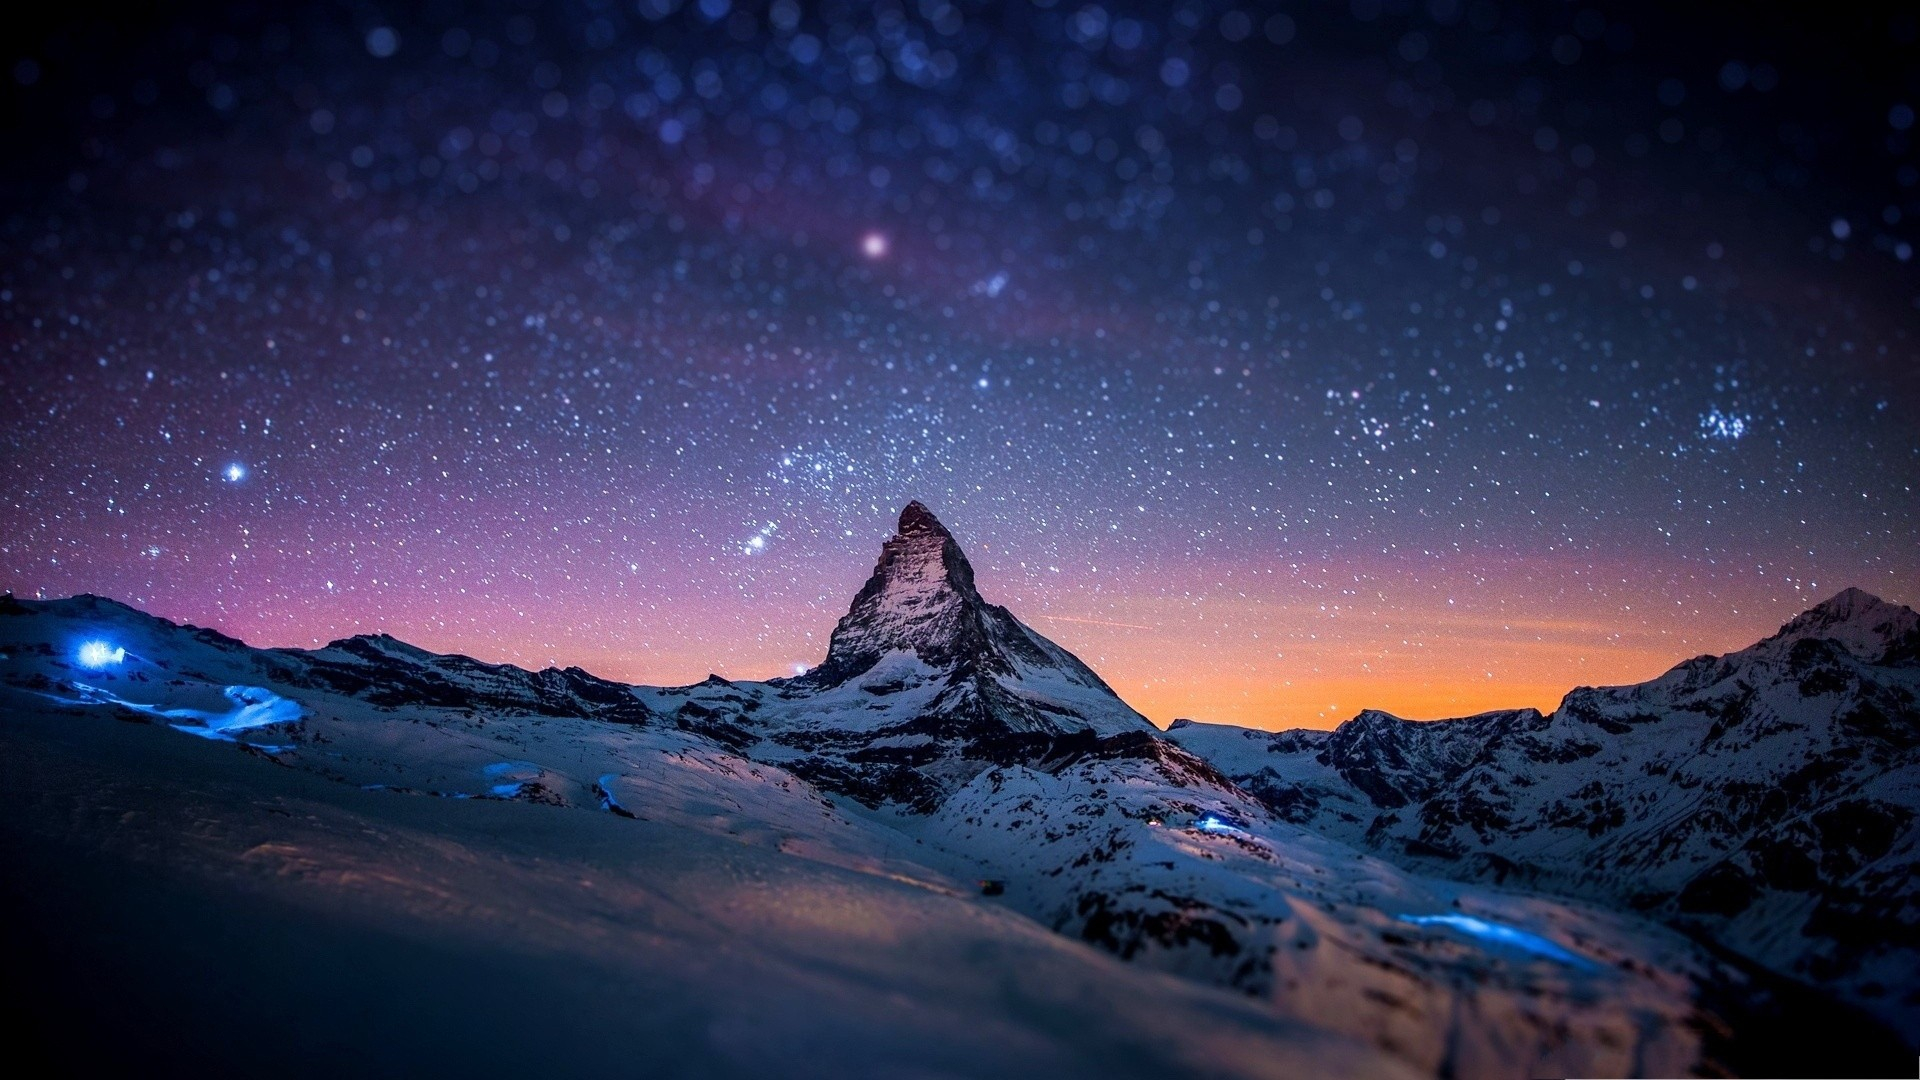 1920x1080 Snowy Winter Night Mountains With Snow Hd Wallpaper KDE Store